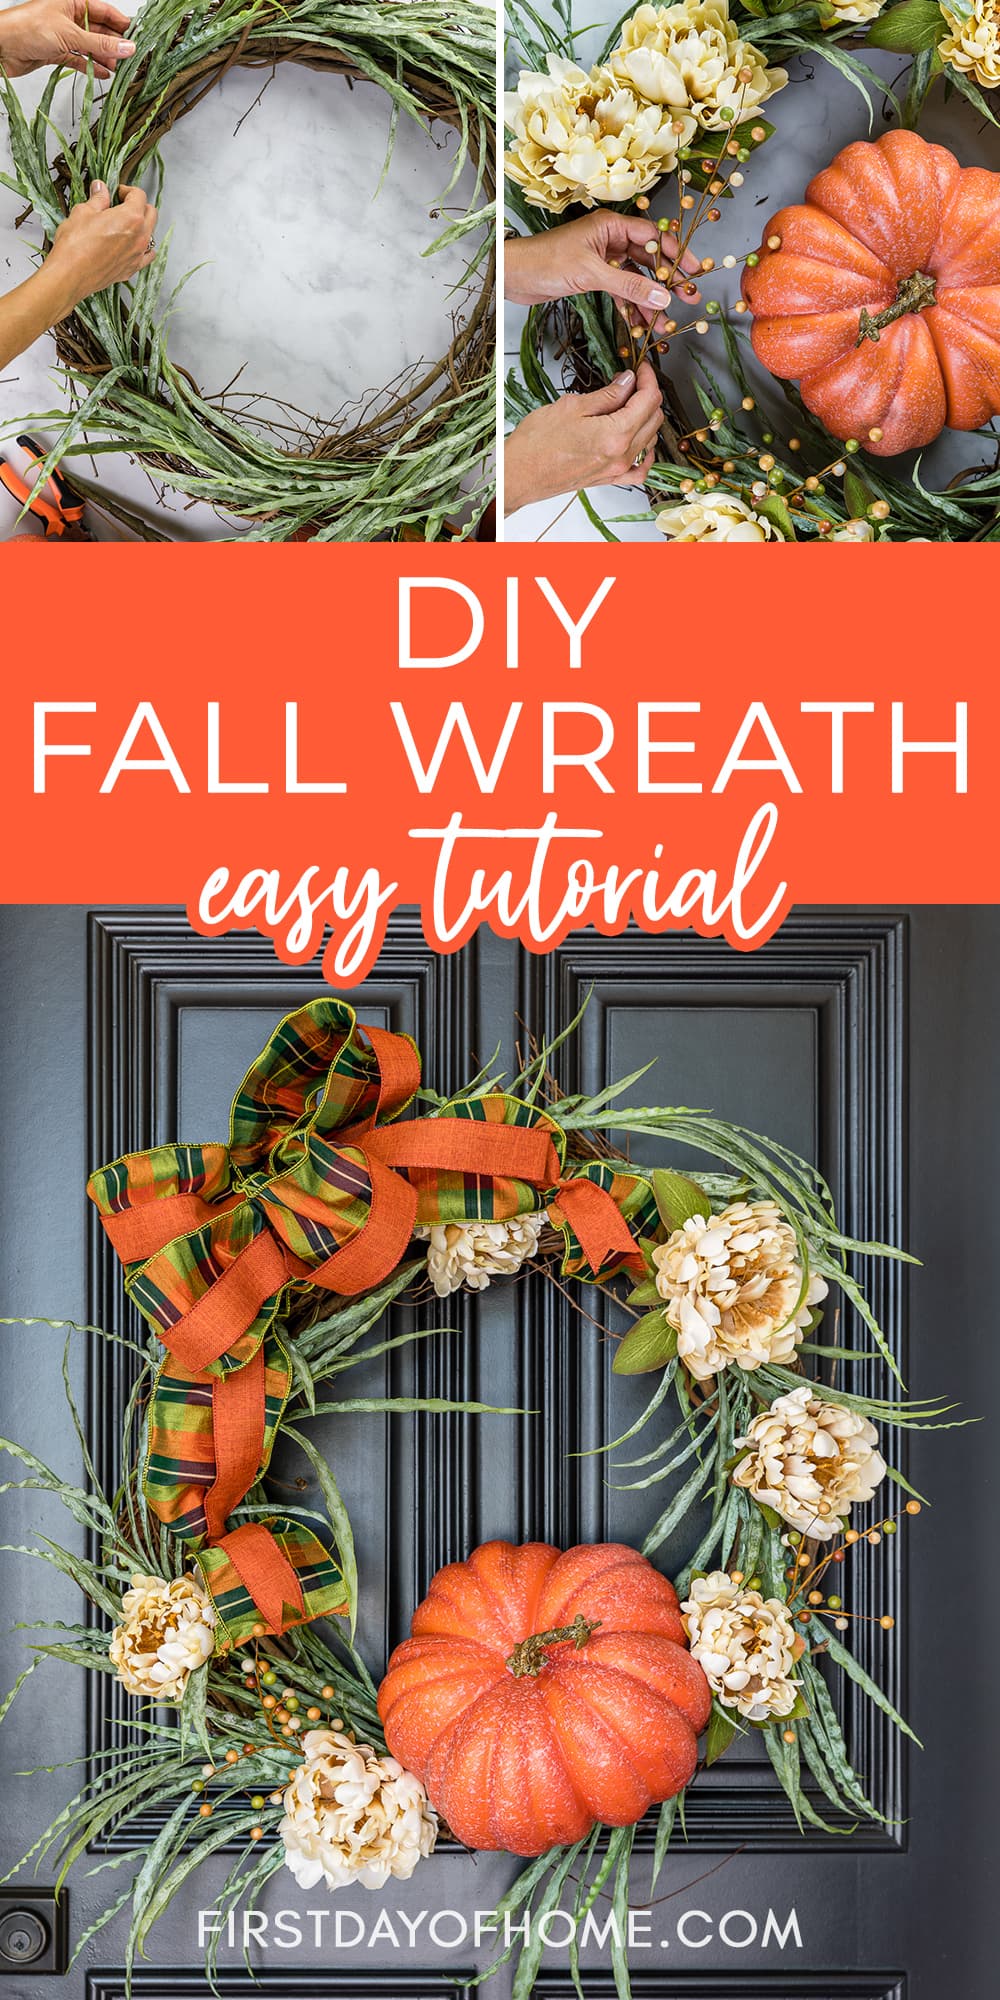 Collage showing steps for making a DIY fall wreath. Text overlay reads "DIY Fall Wreath Easy Tutorial".